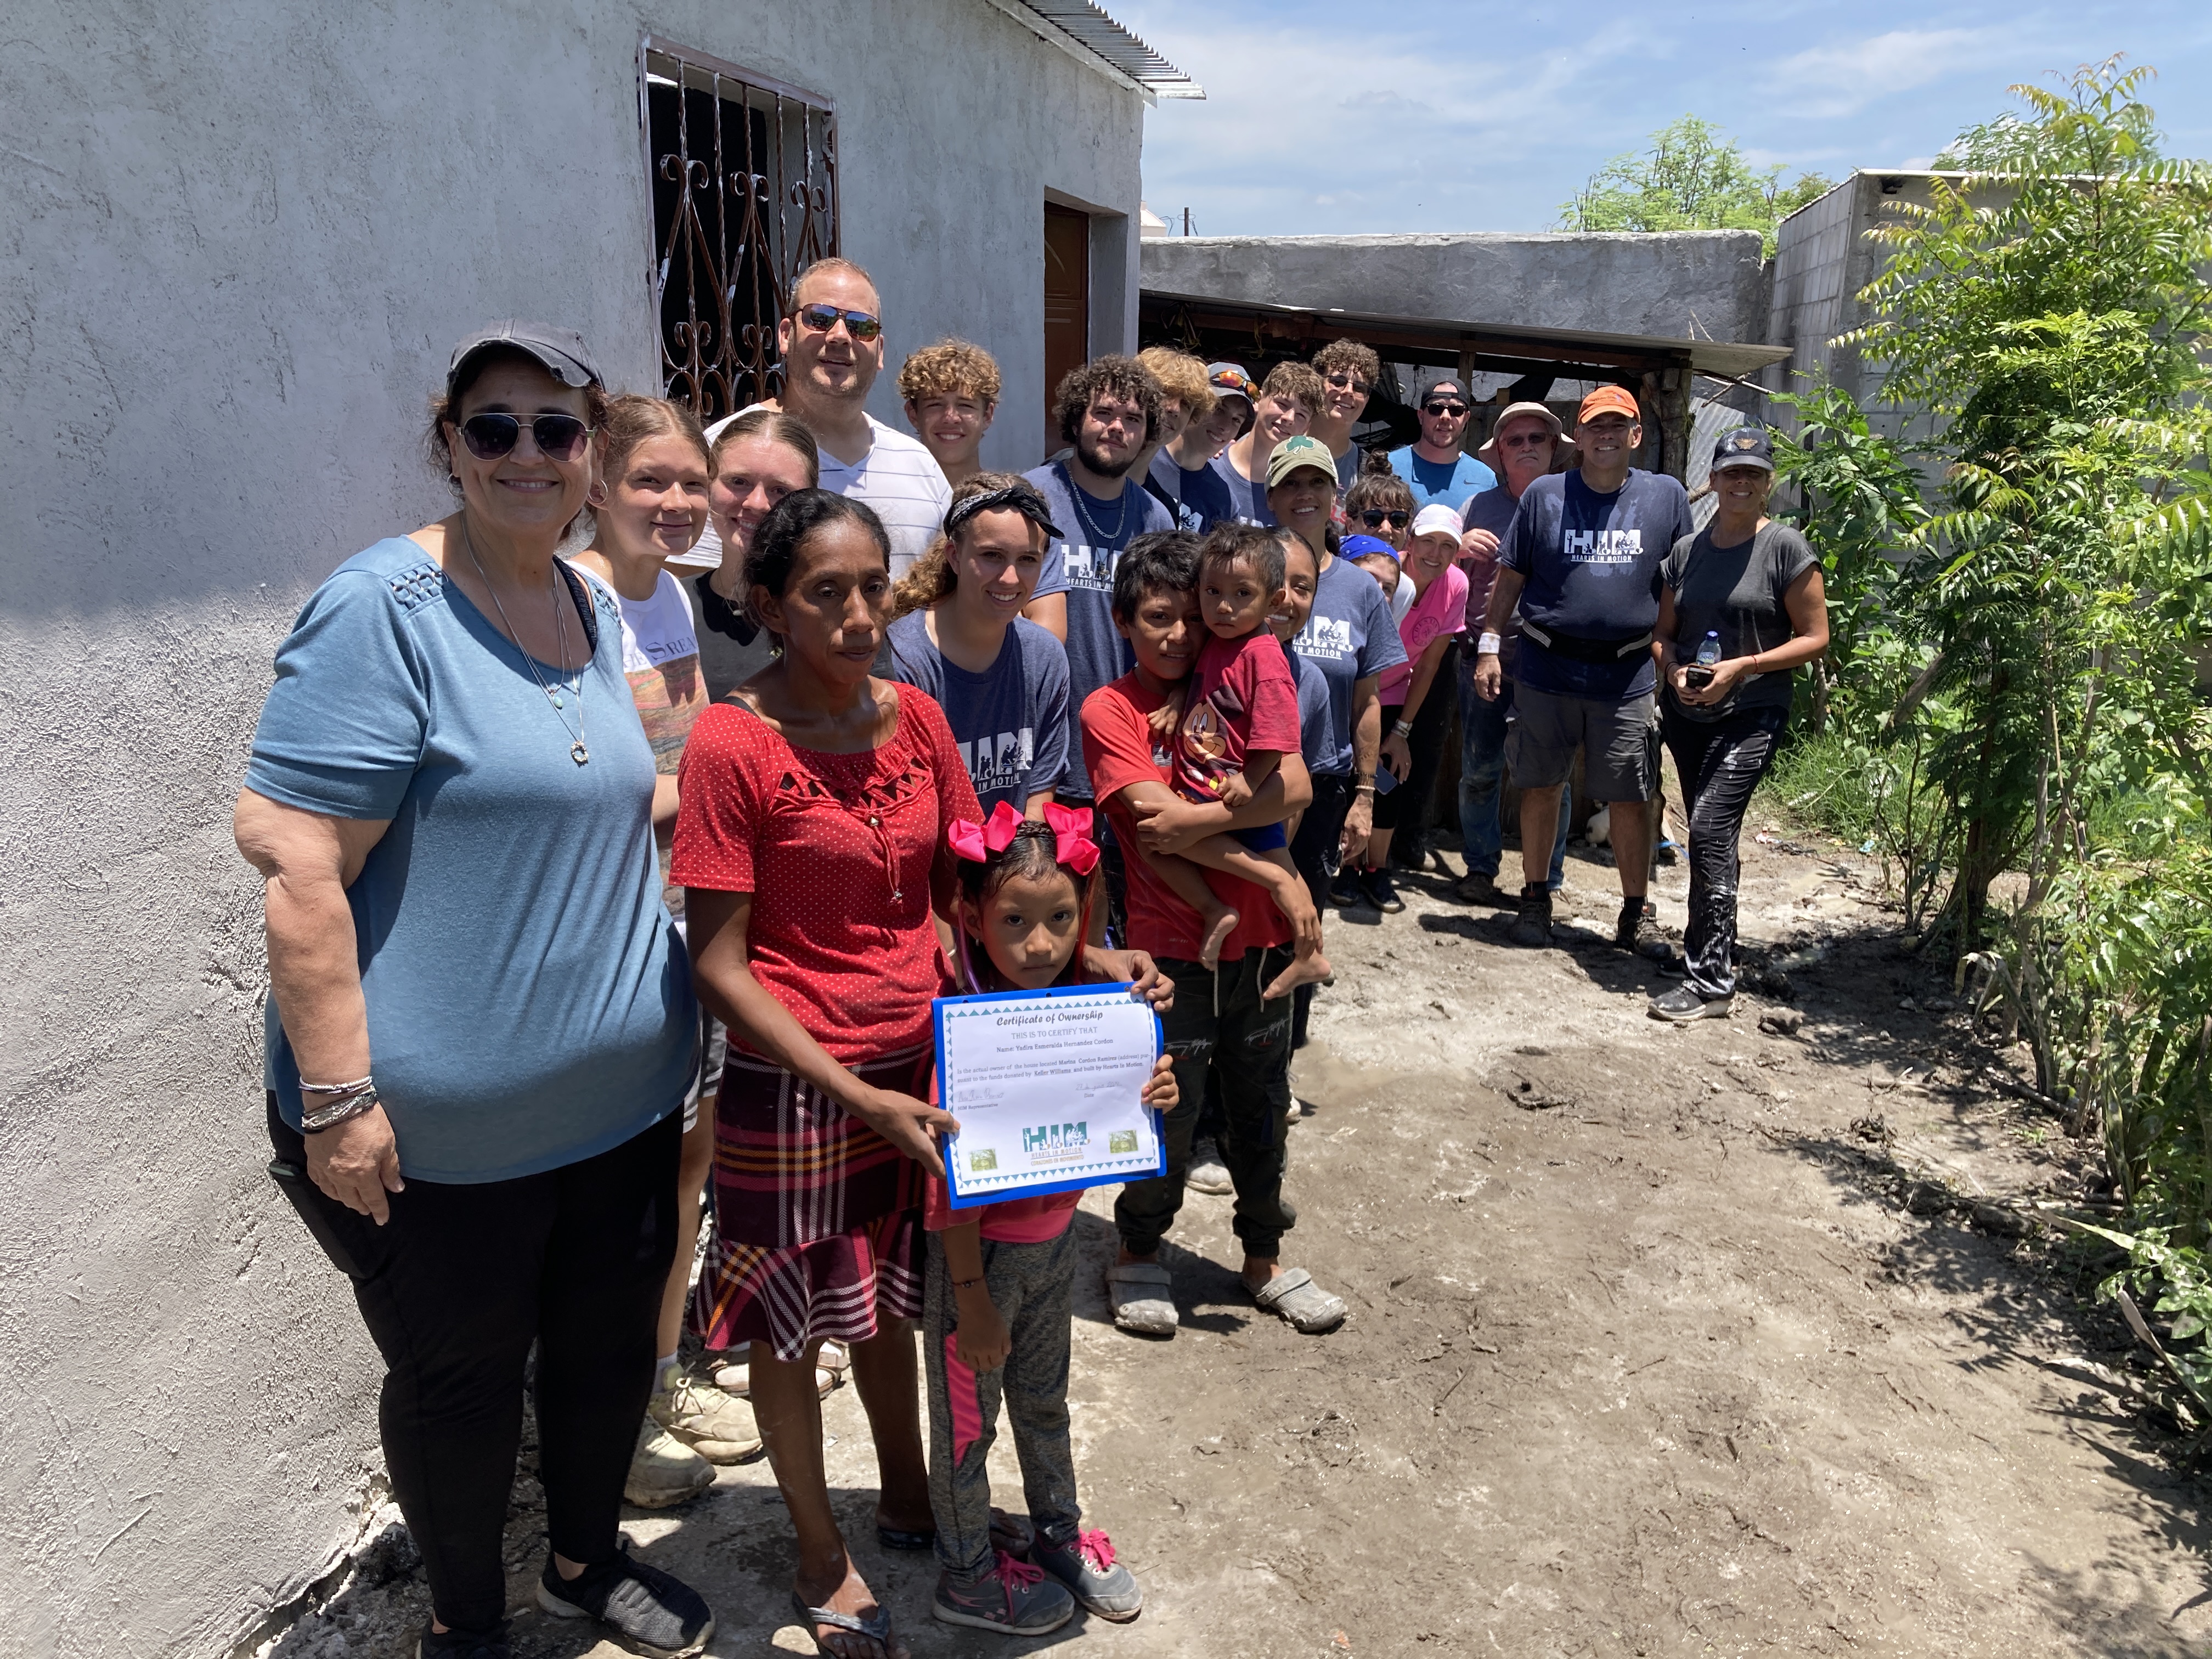 The St. Patrick Church Youth Group is traveling to Guatemala with HIM to build a new home for one of the kids and their family, in our daycare program in Pueblo Modelo.